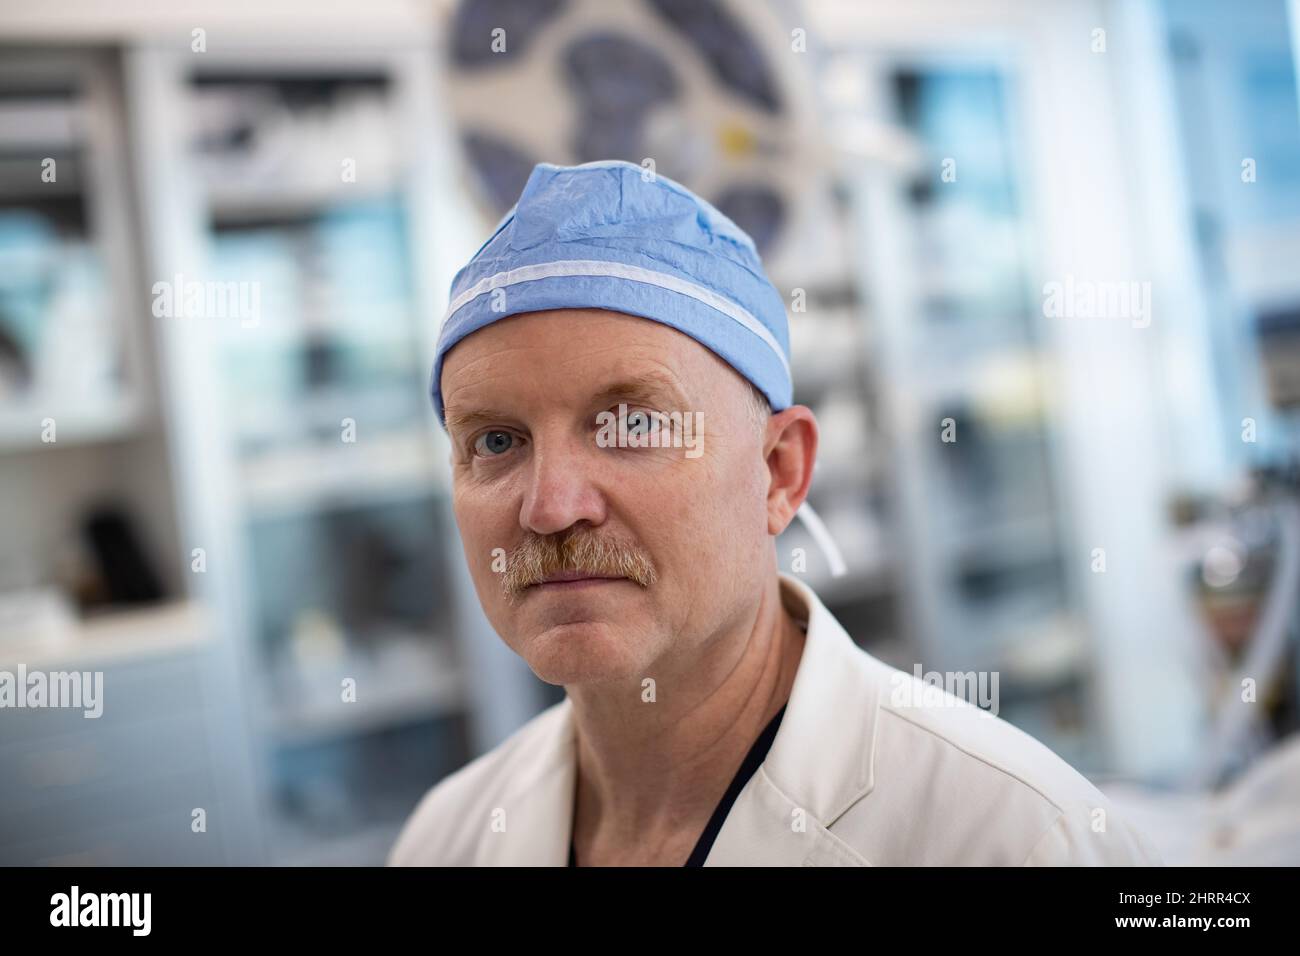 Dr. Mathew Mosher, president of the Canadian Society for Aesthetic Plastic Surgery, poses for a photograph at his practice, in Langley, B.C., on Thursday, January 21, 2021. Some cosmetic physicians say more patients are seeking out surgical solutions as the crisis has afforded people more time to scrutinize their perceived flaws, and the flexibility to get work done without raising eyebrows among friends and coworkers. THE CANADIAN PRESS/Darryl Dyck Stock Photo